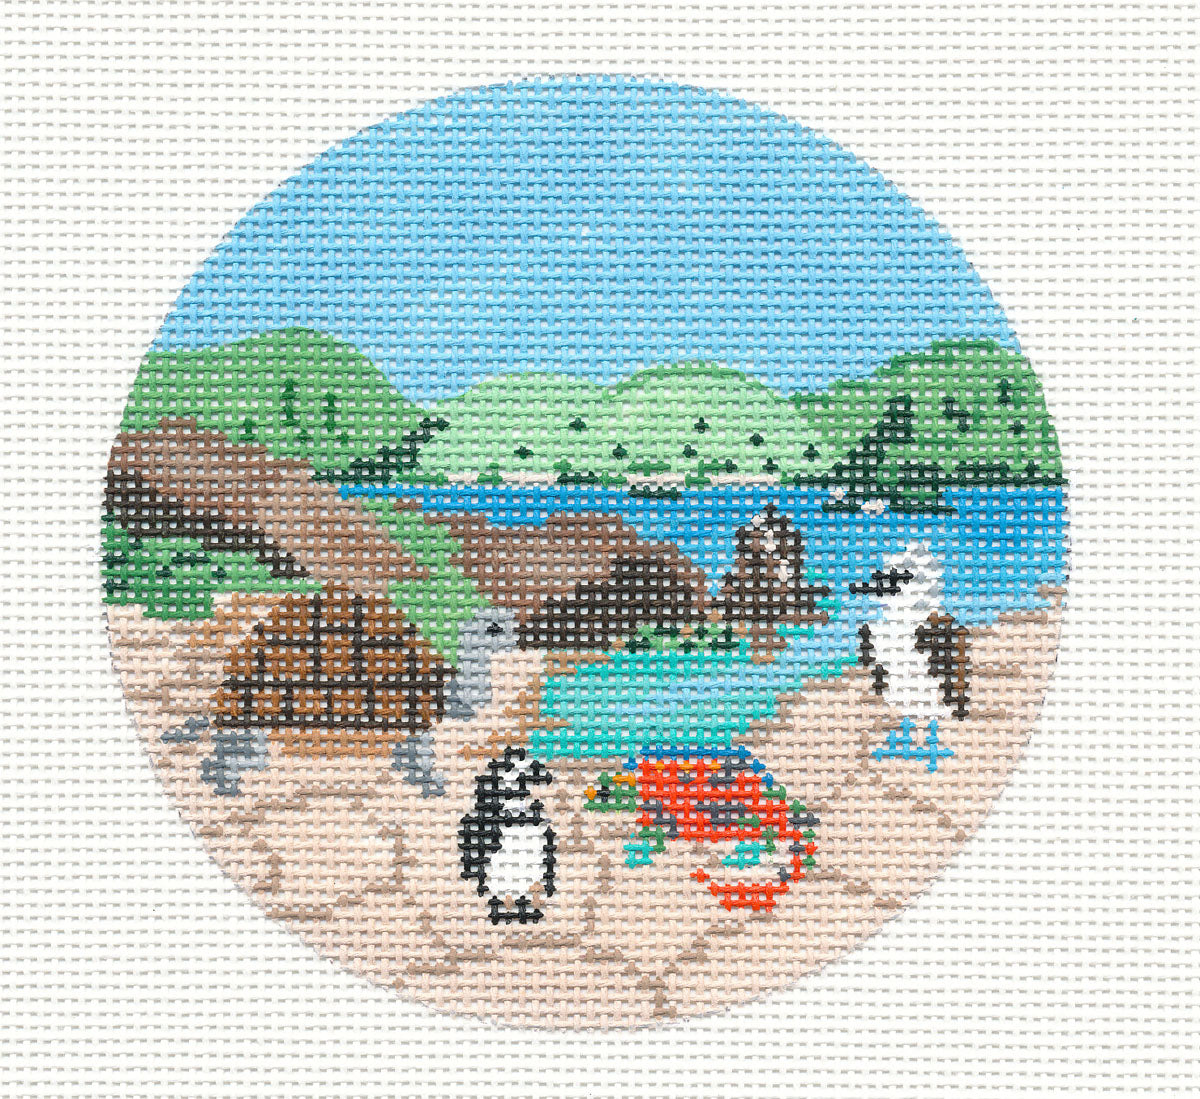 Travel Round ~ Galapagos Islands ~ Travel & Destination  4" Round handpainted Needlepoint Canvas by Painted Pony